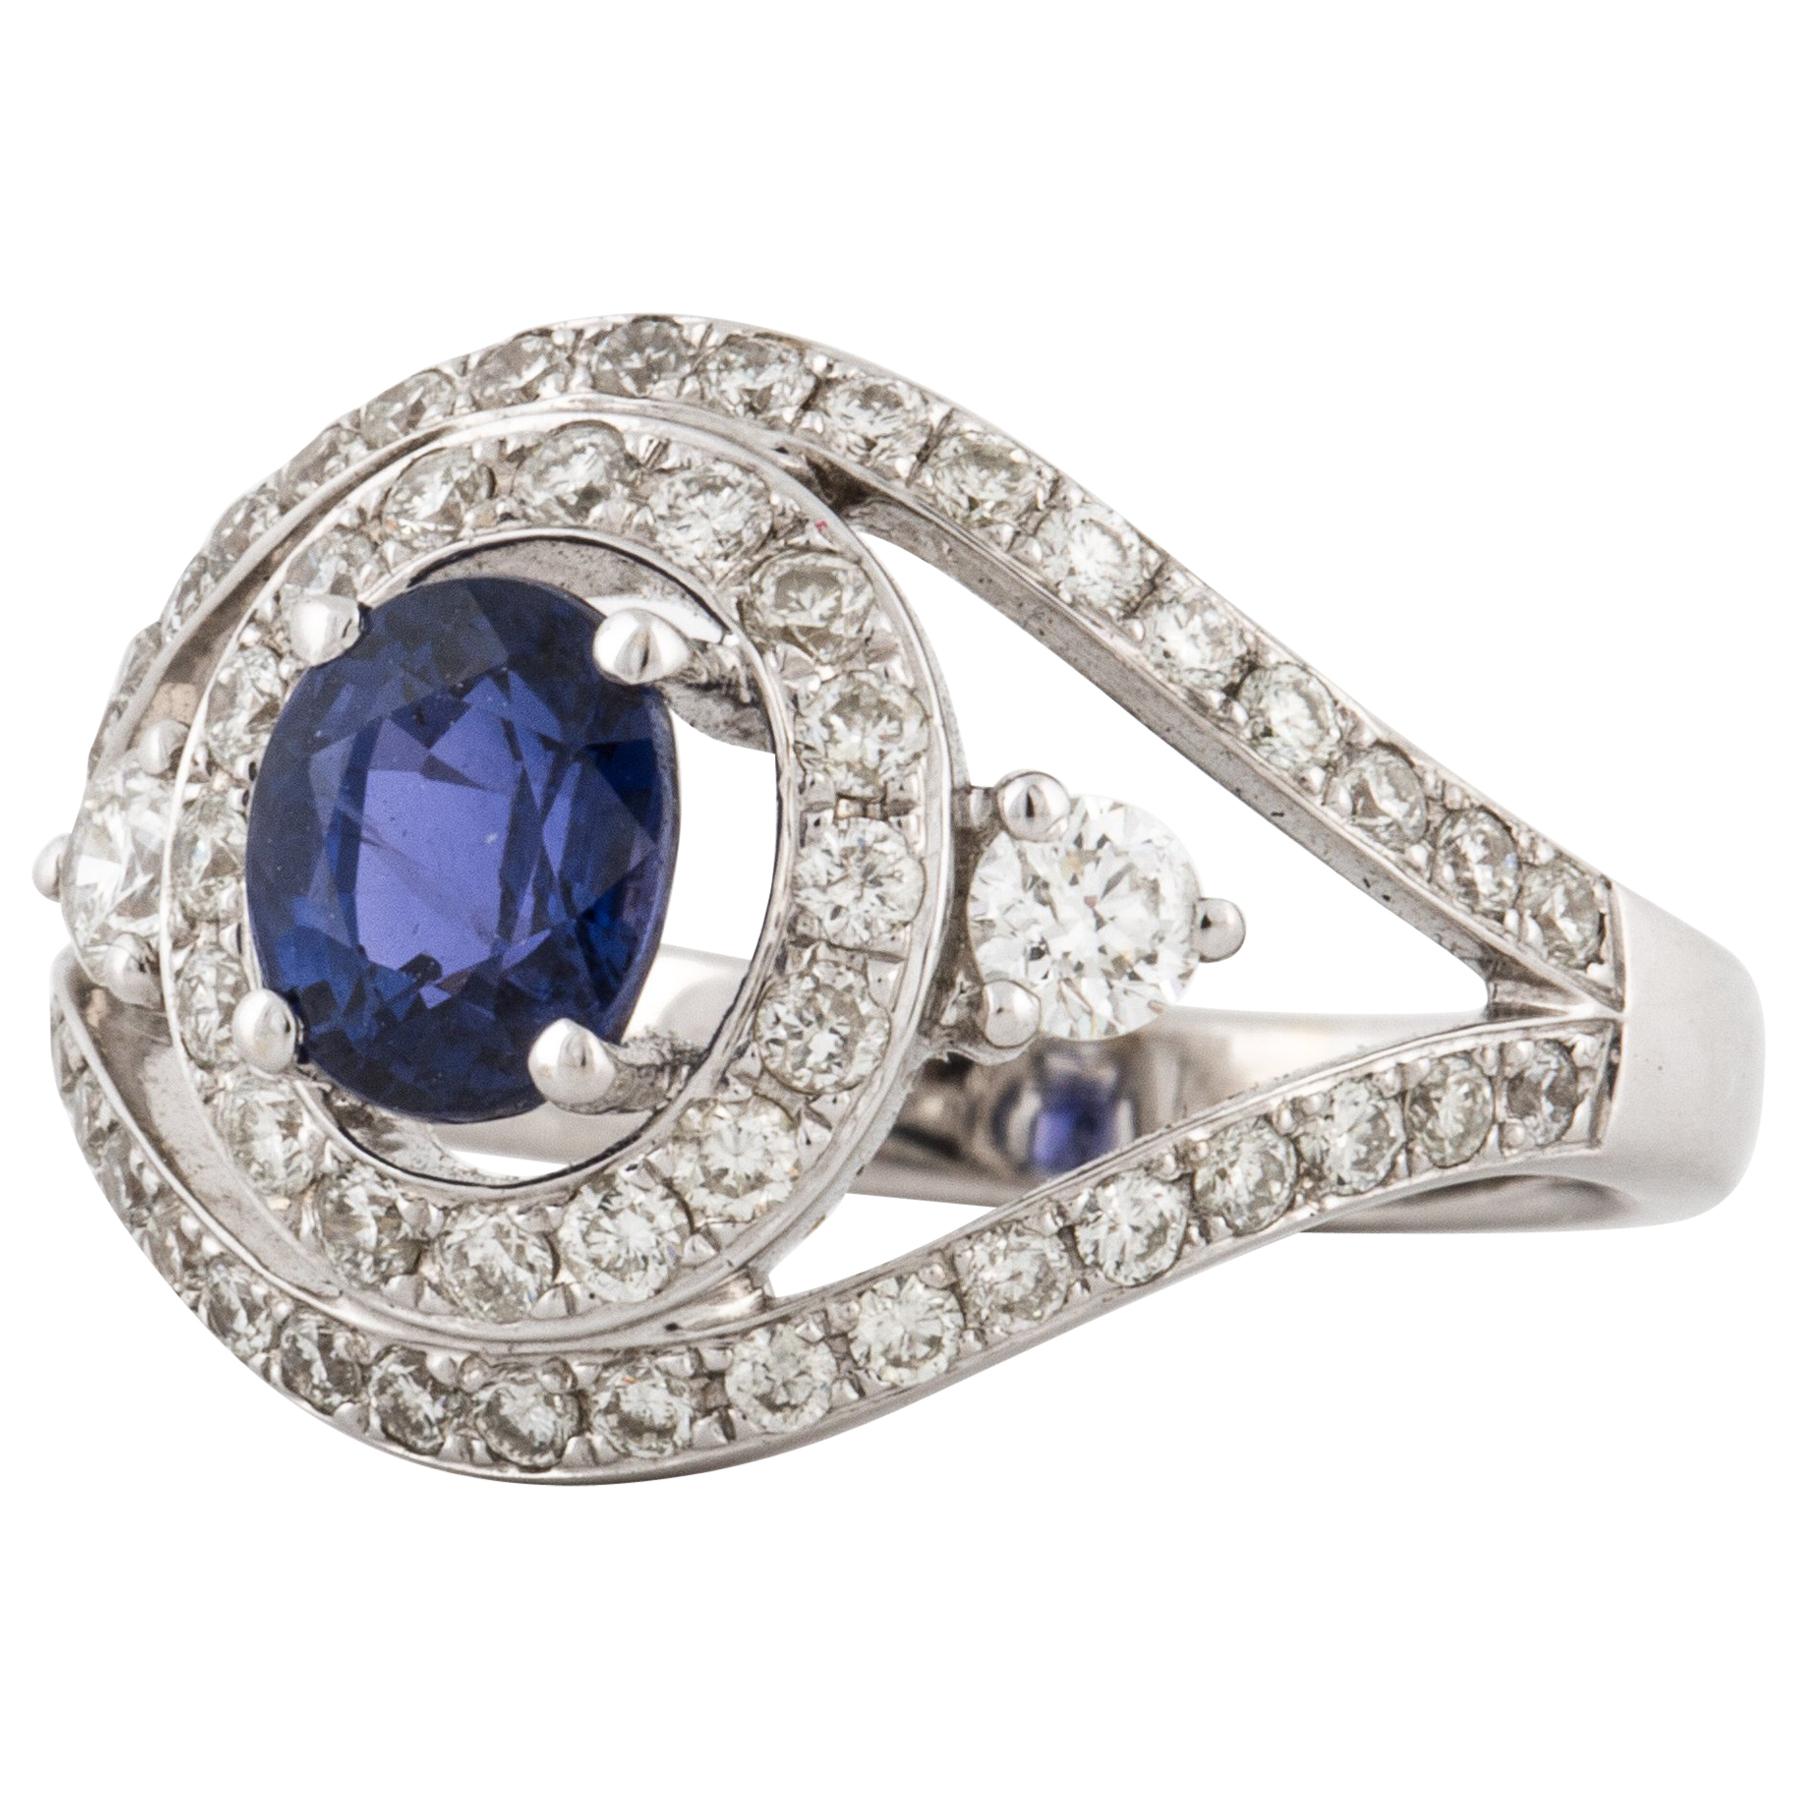 Oval Purple Sapphire and Diamond Ring in 18K White Gold